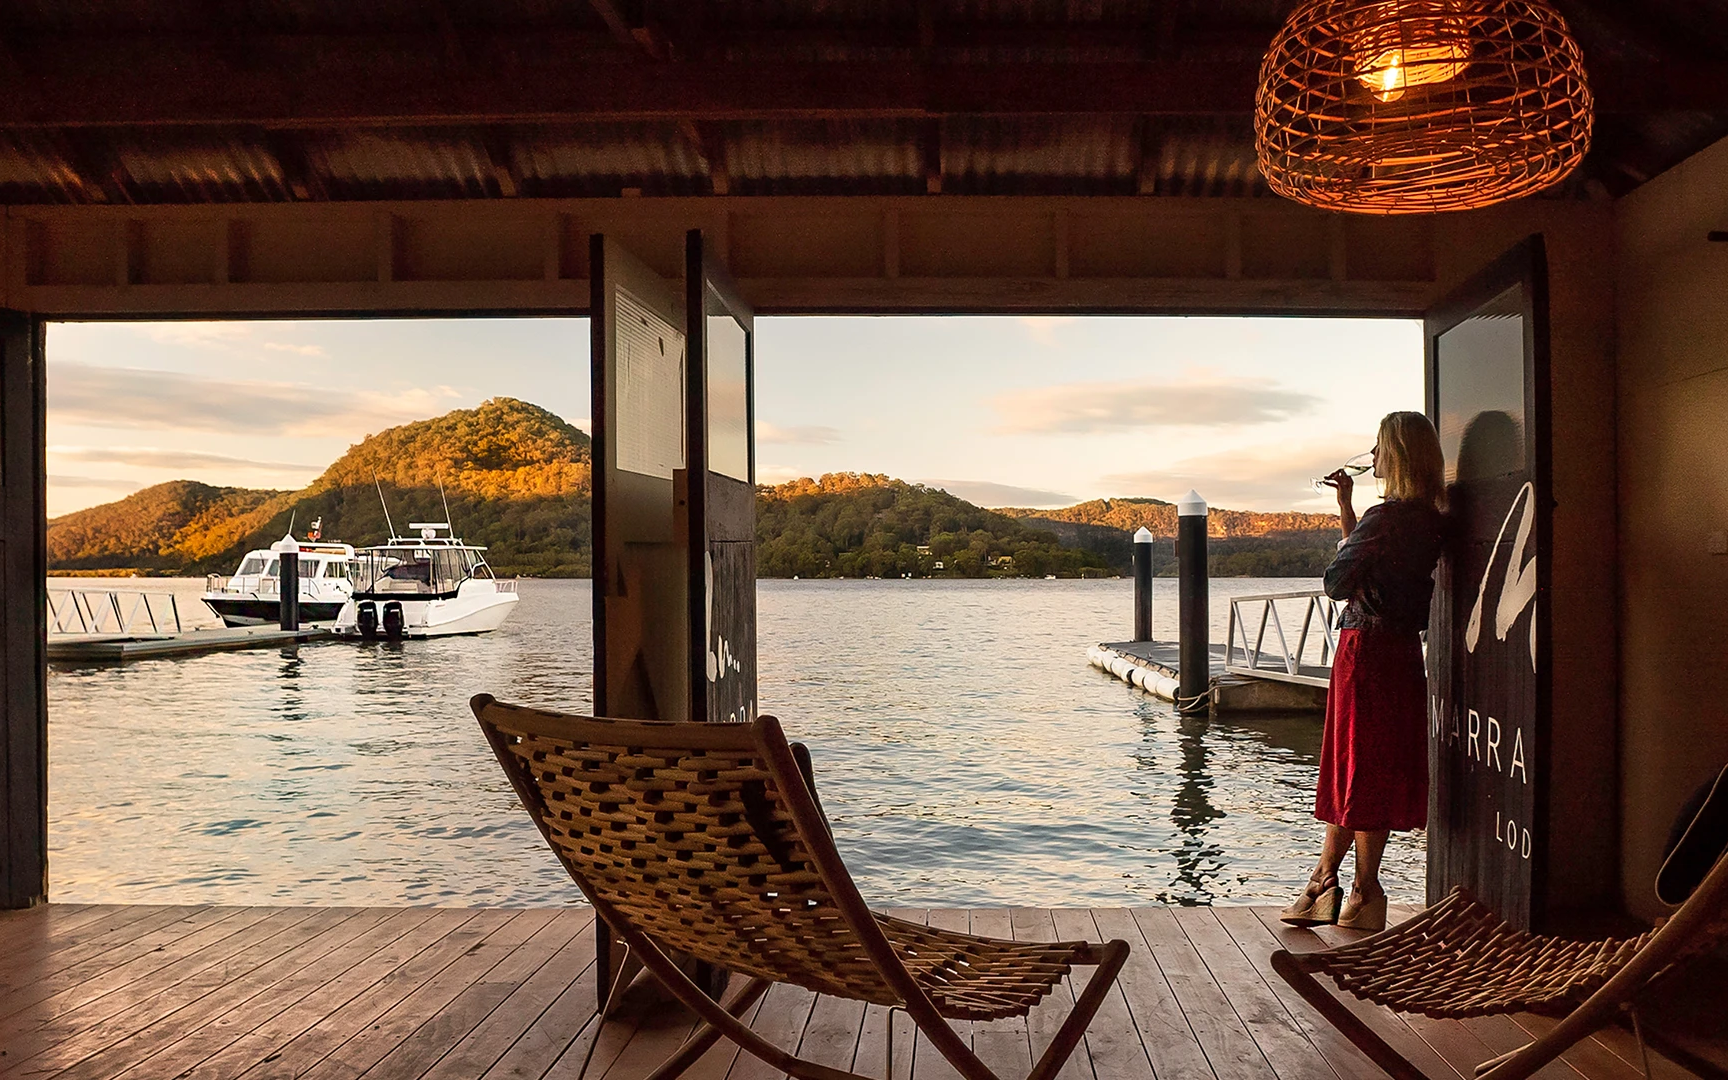 Marramarra Lodge is one of the top bucket-list hotels in Australia - Luxury Escapes